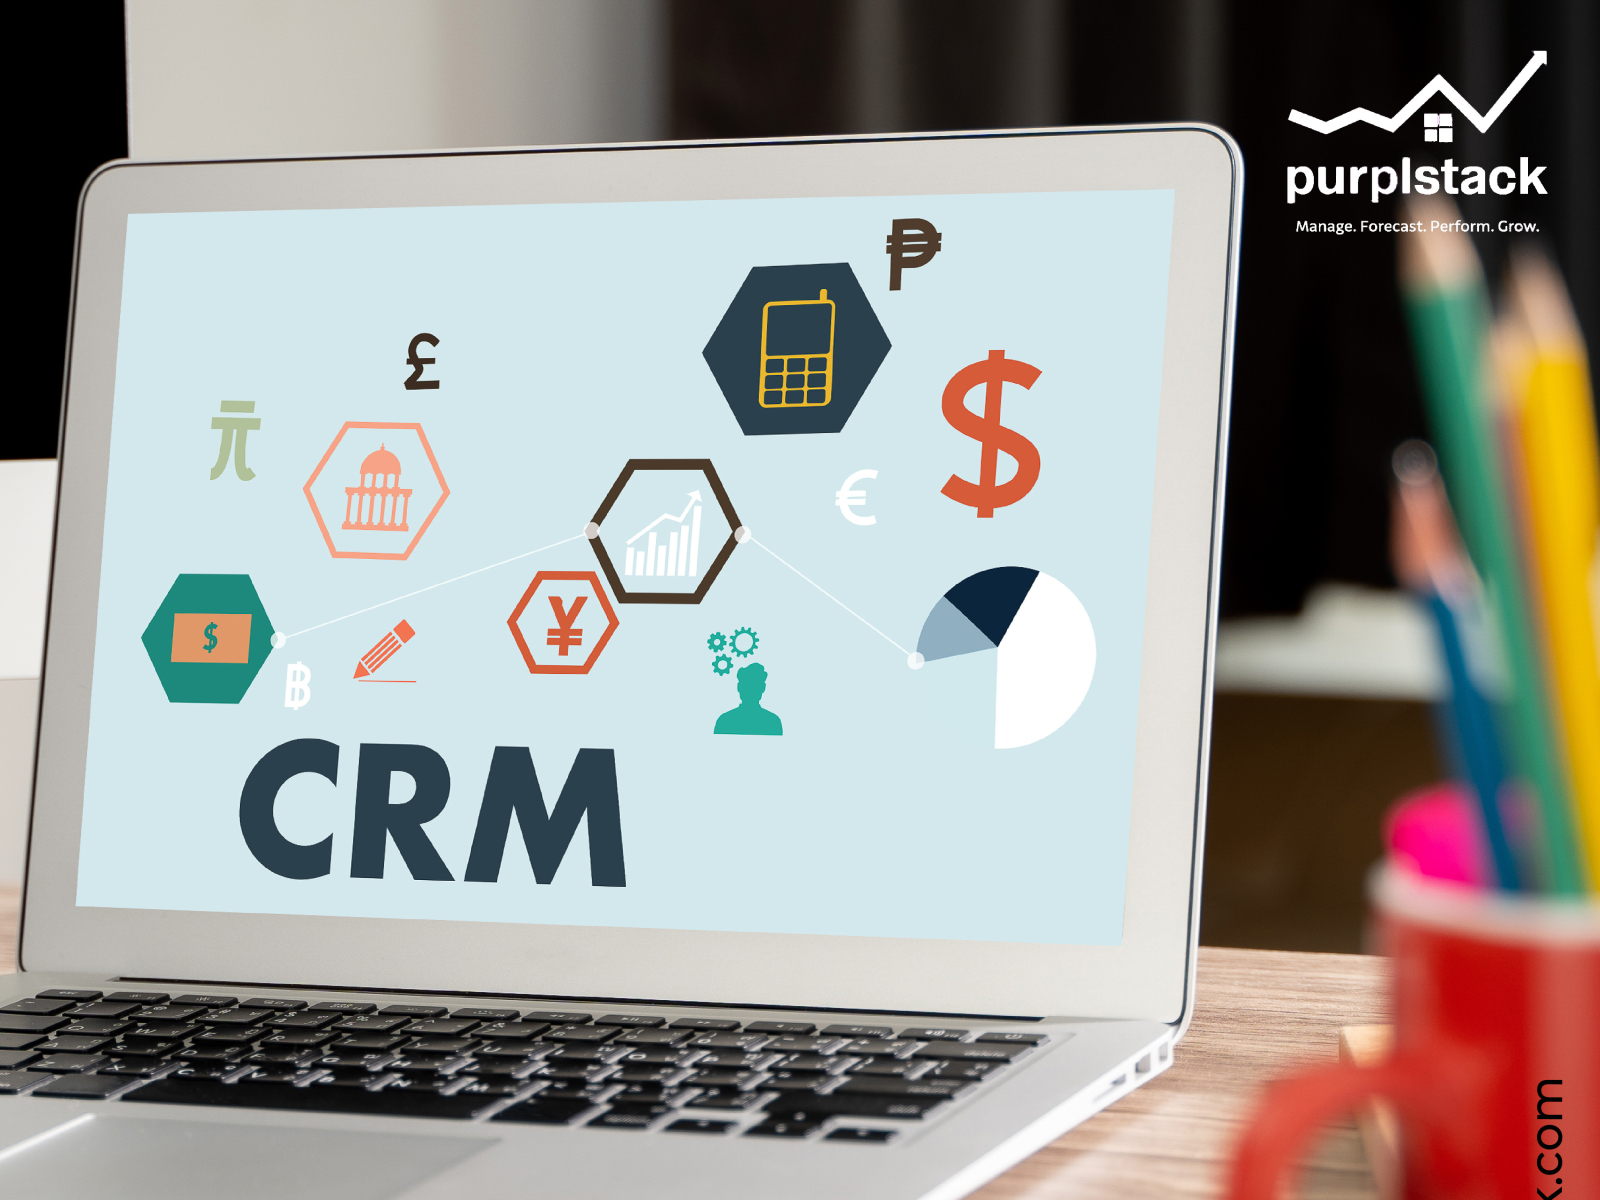 Best CRM companies in India by Purpl stack on Dribbble